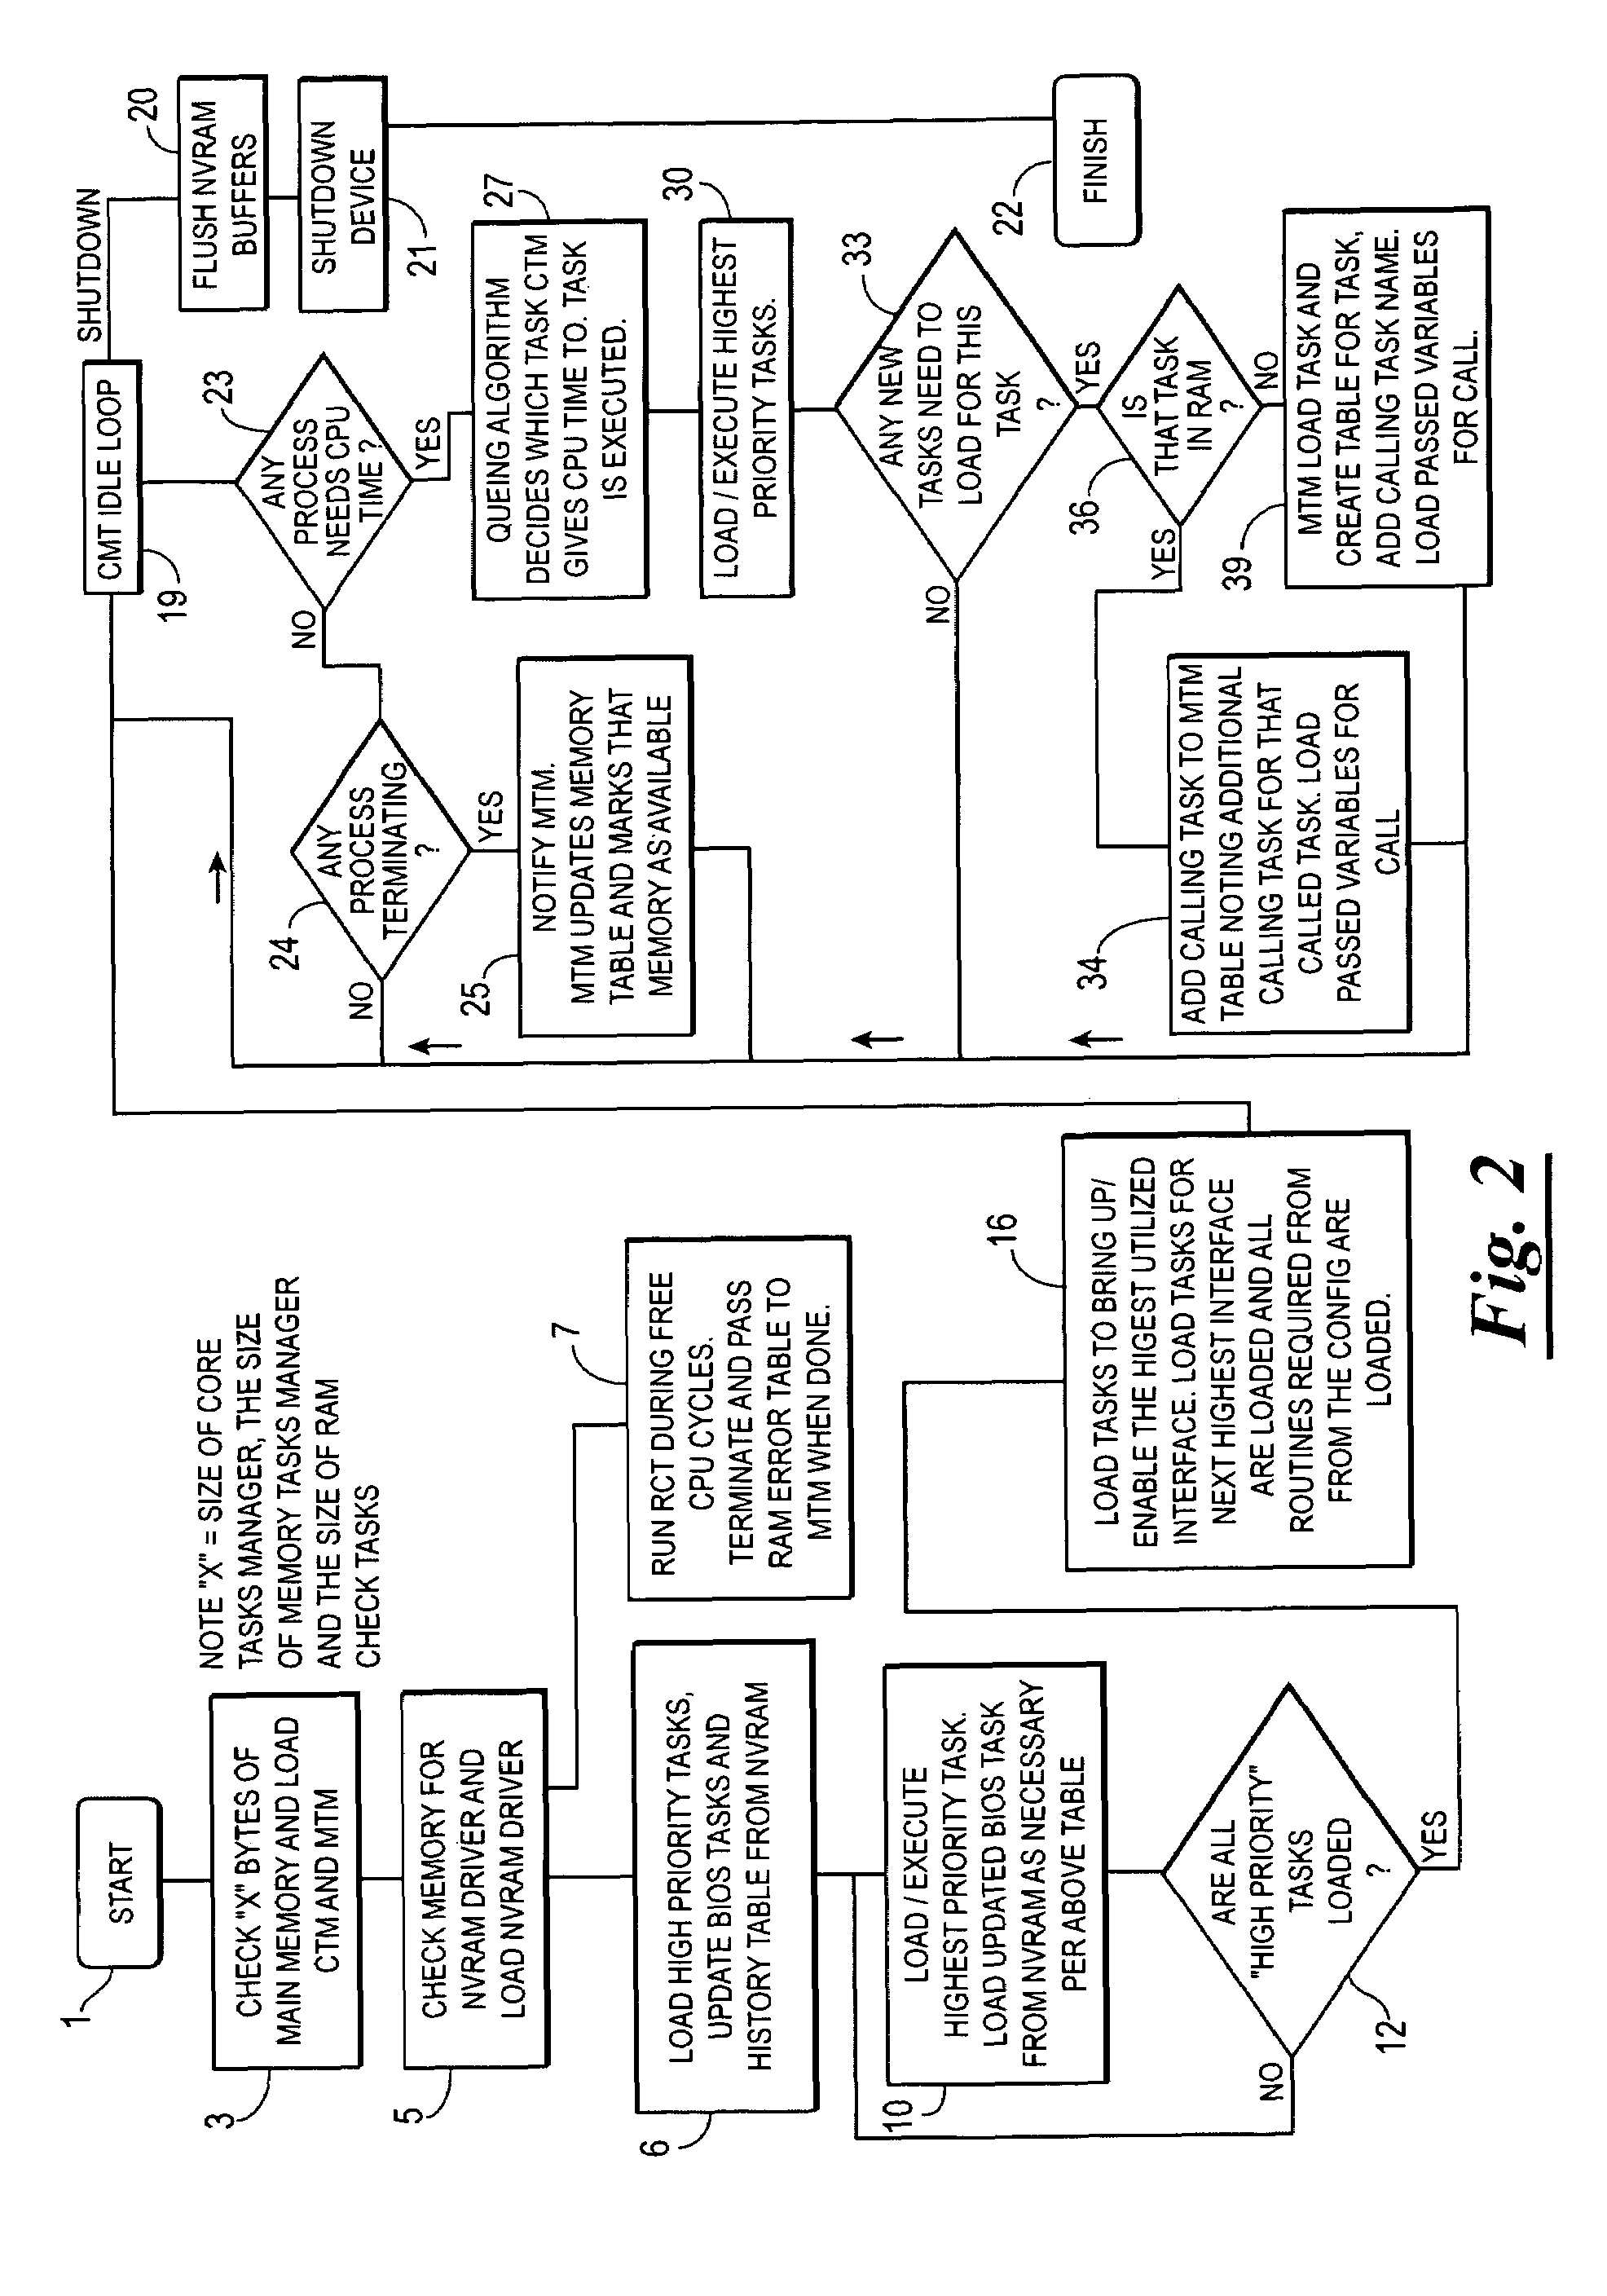 Method and apparatus to minimize computer apparatus initial program load and exit/shut down processing